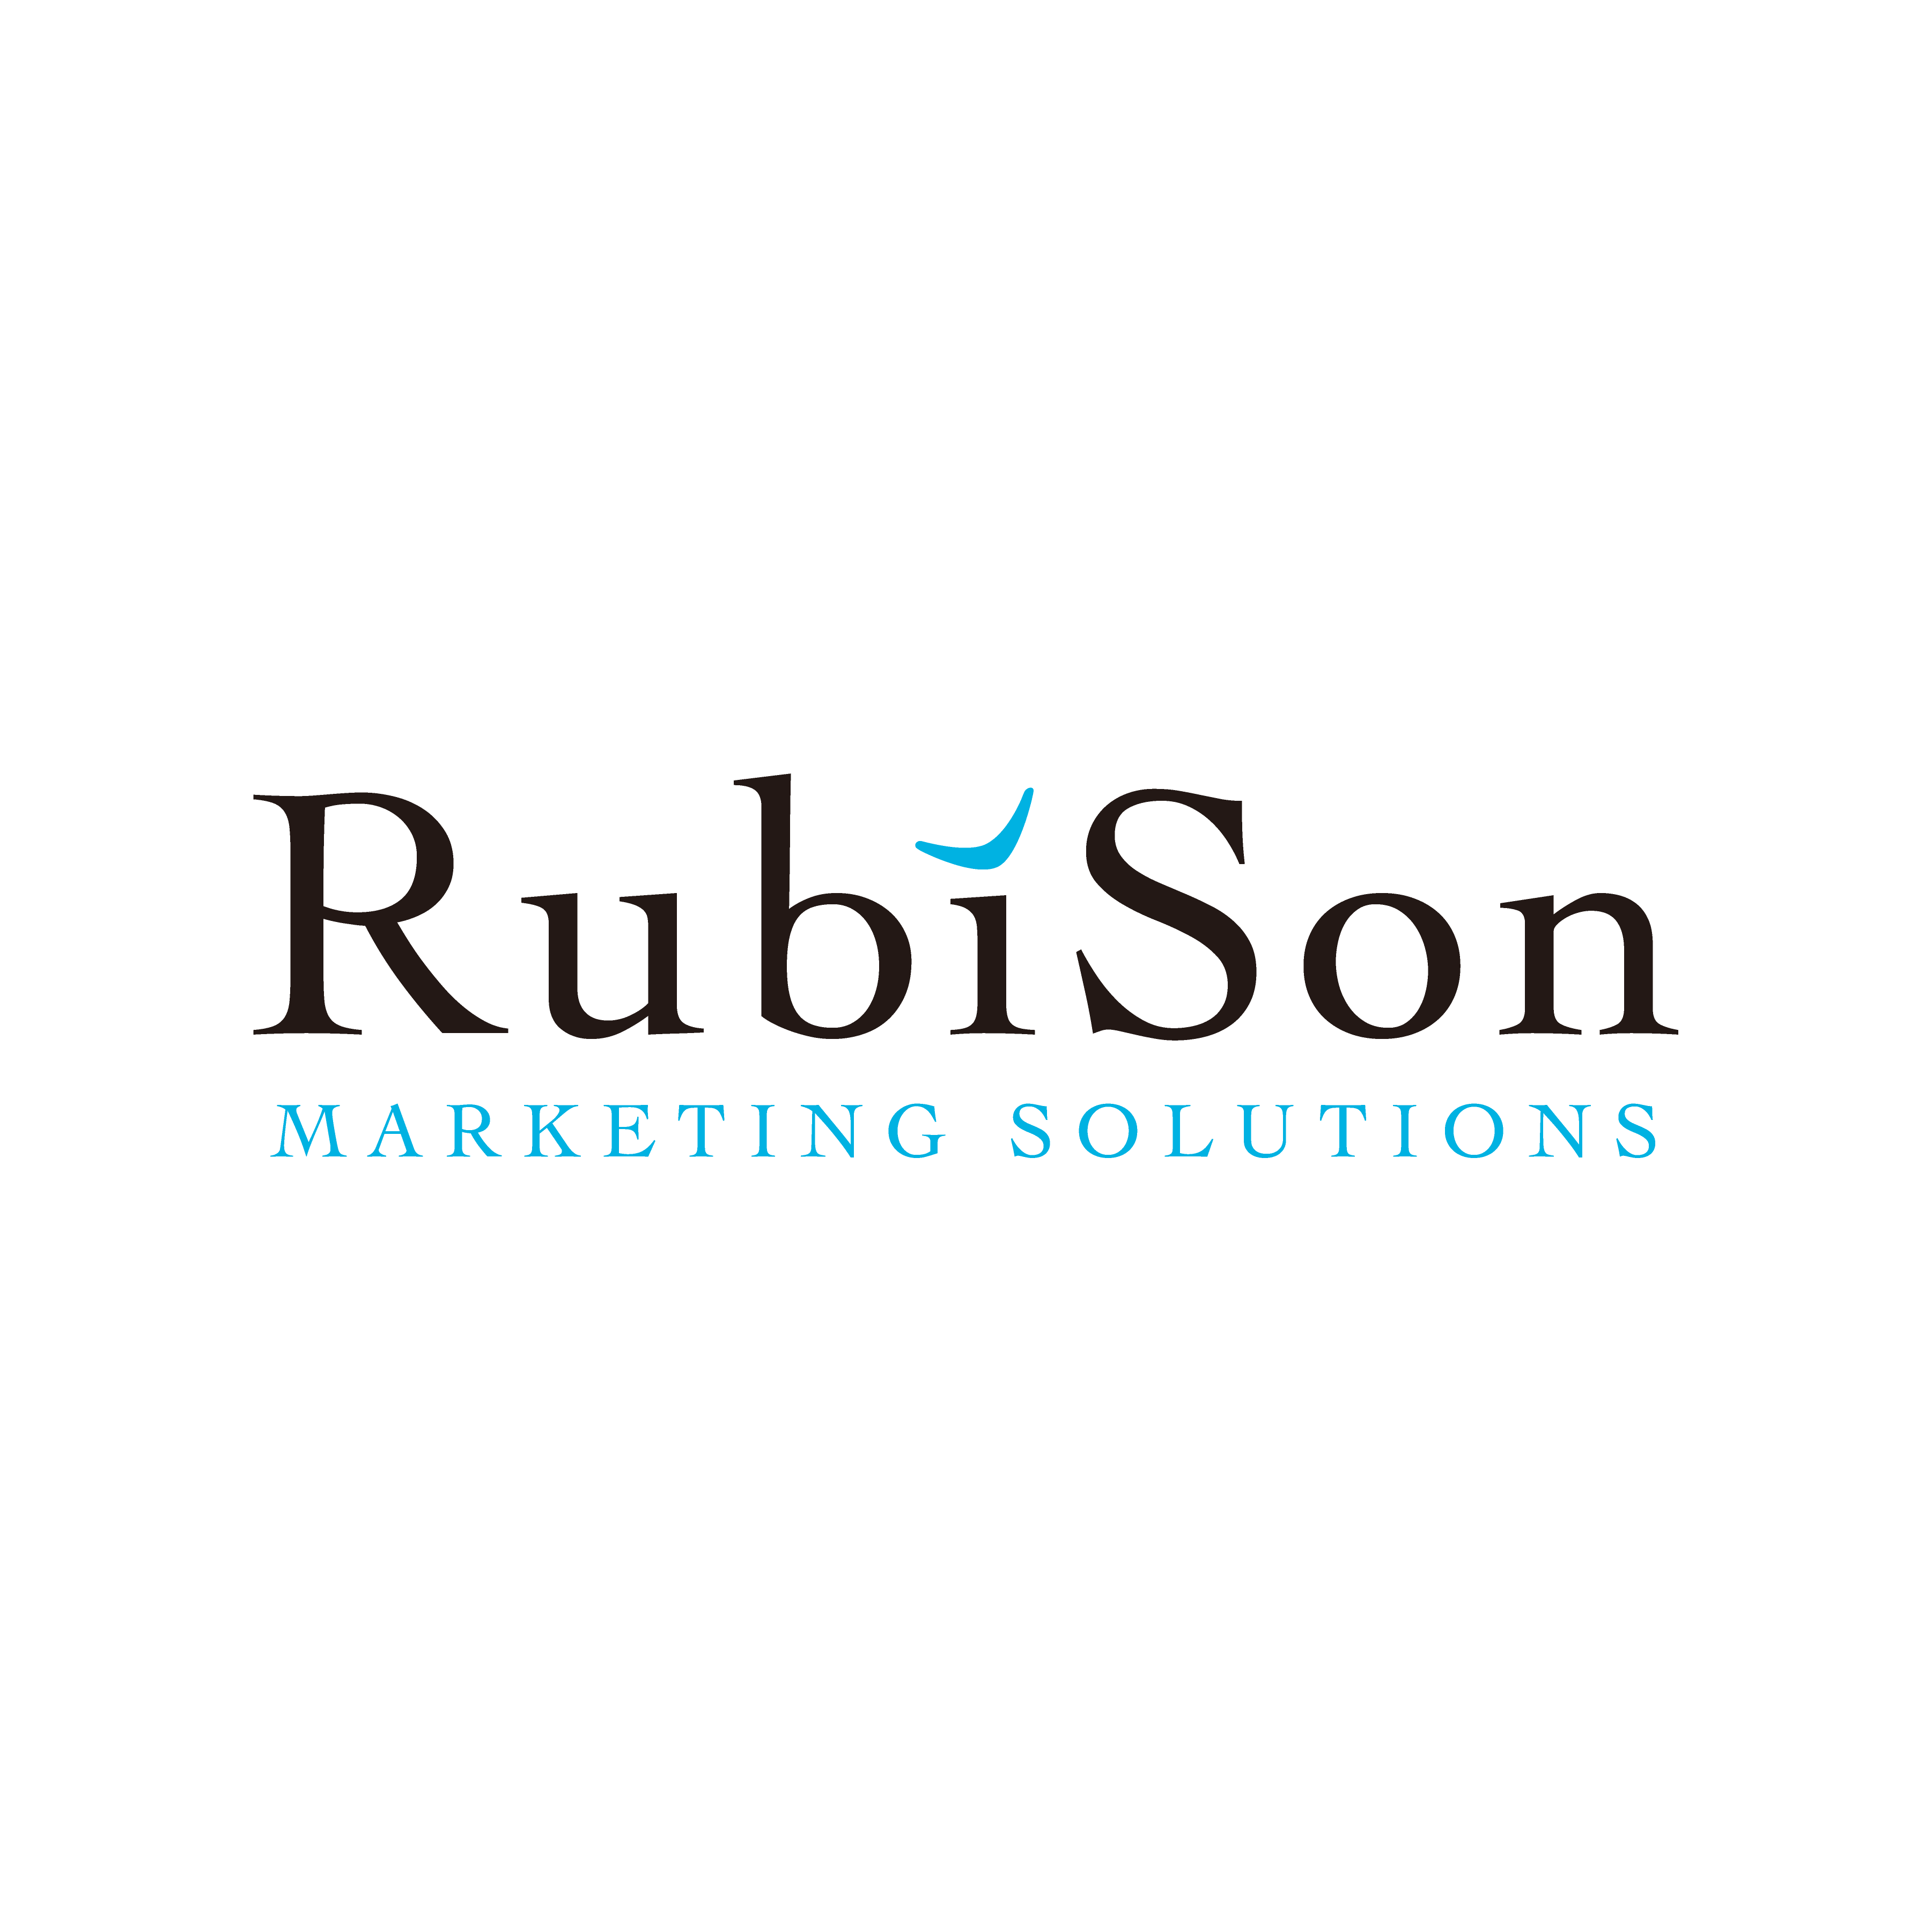 Rubison Marketing Solutions Limited